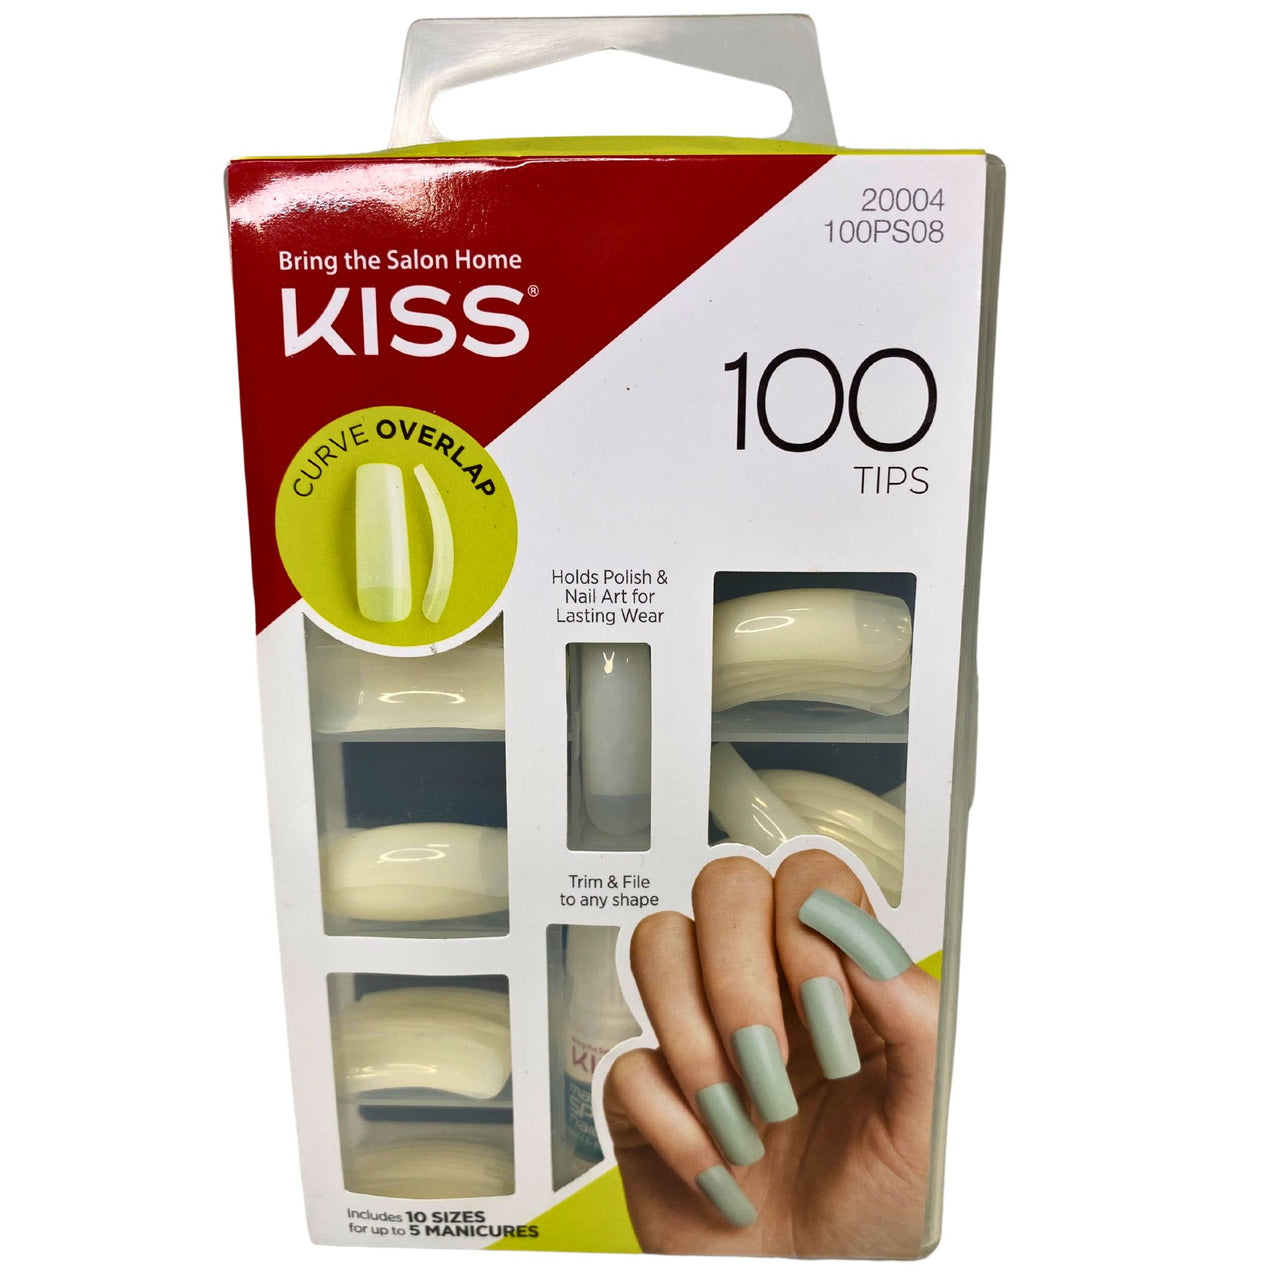 Kiss Bring The Salon Home 100 Tips Includes 10 sizes 